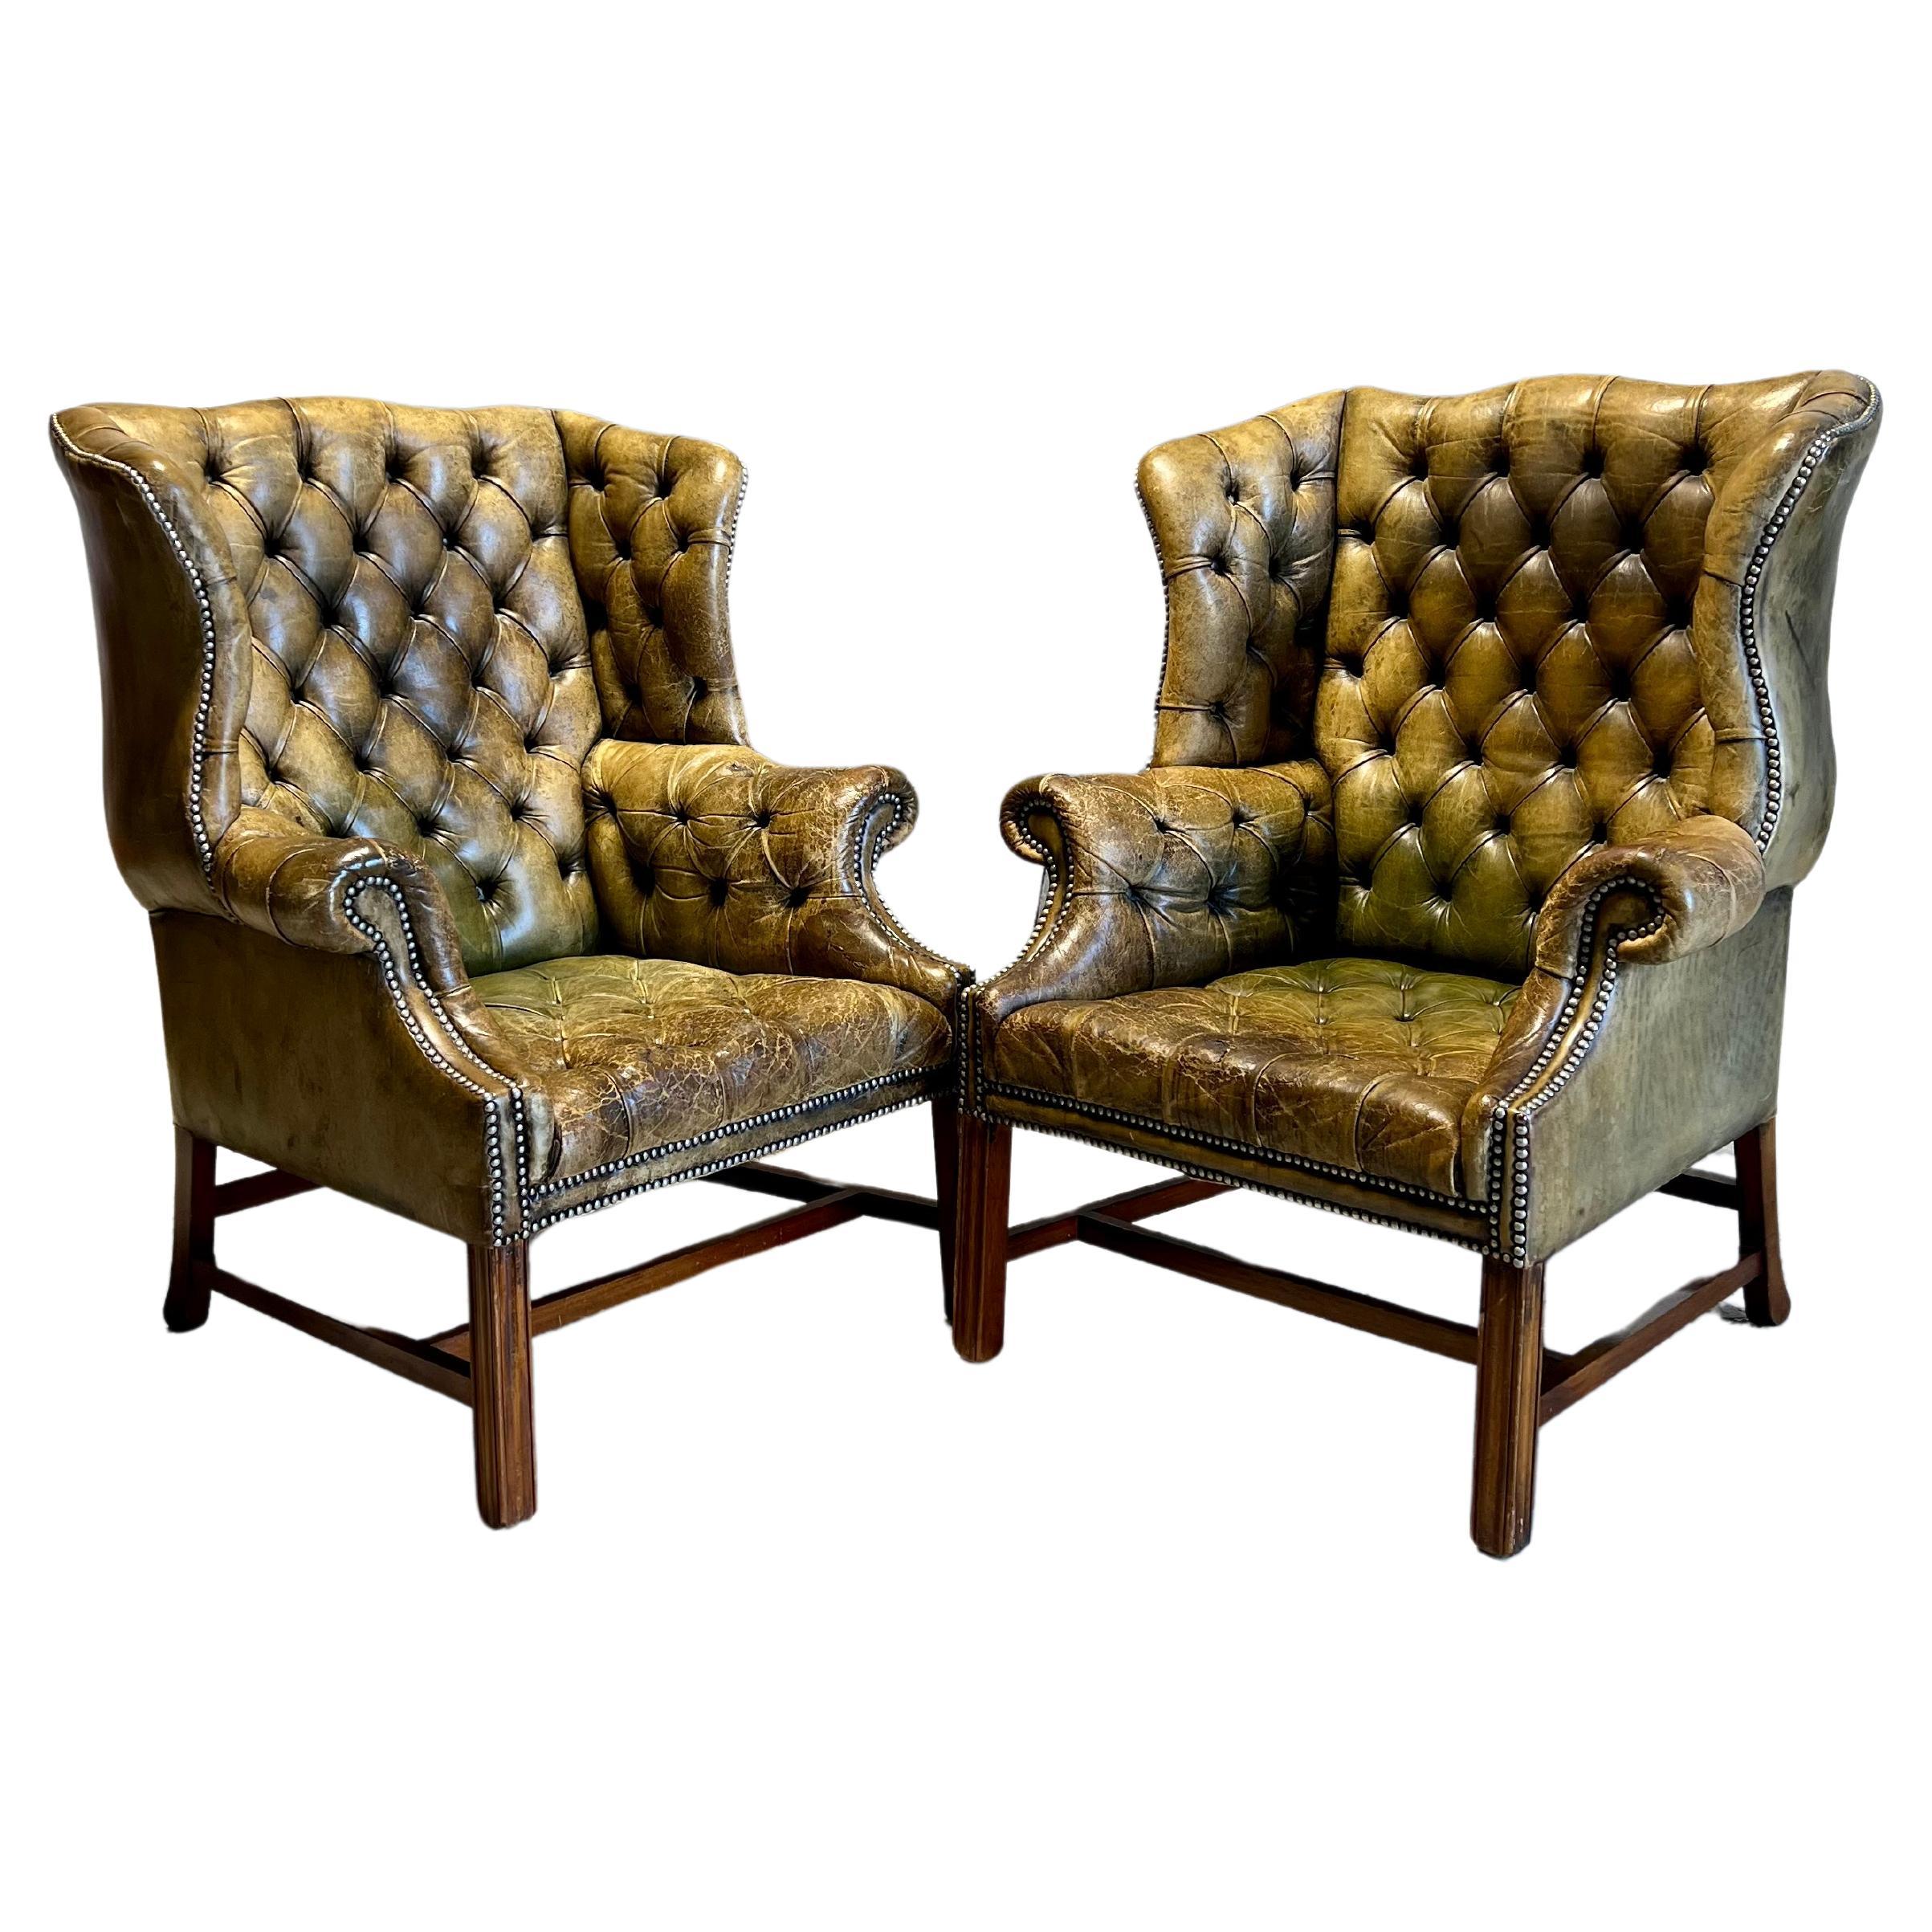 Exceptional Pair of MidC Chesterfield Wing Back Chairs in Original Leather For Sale